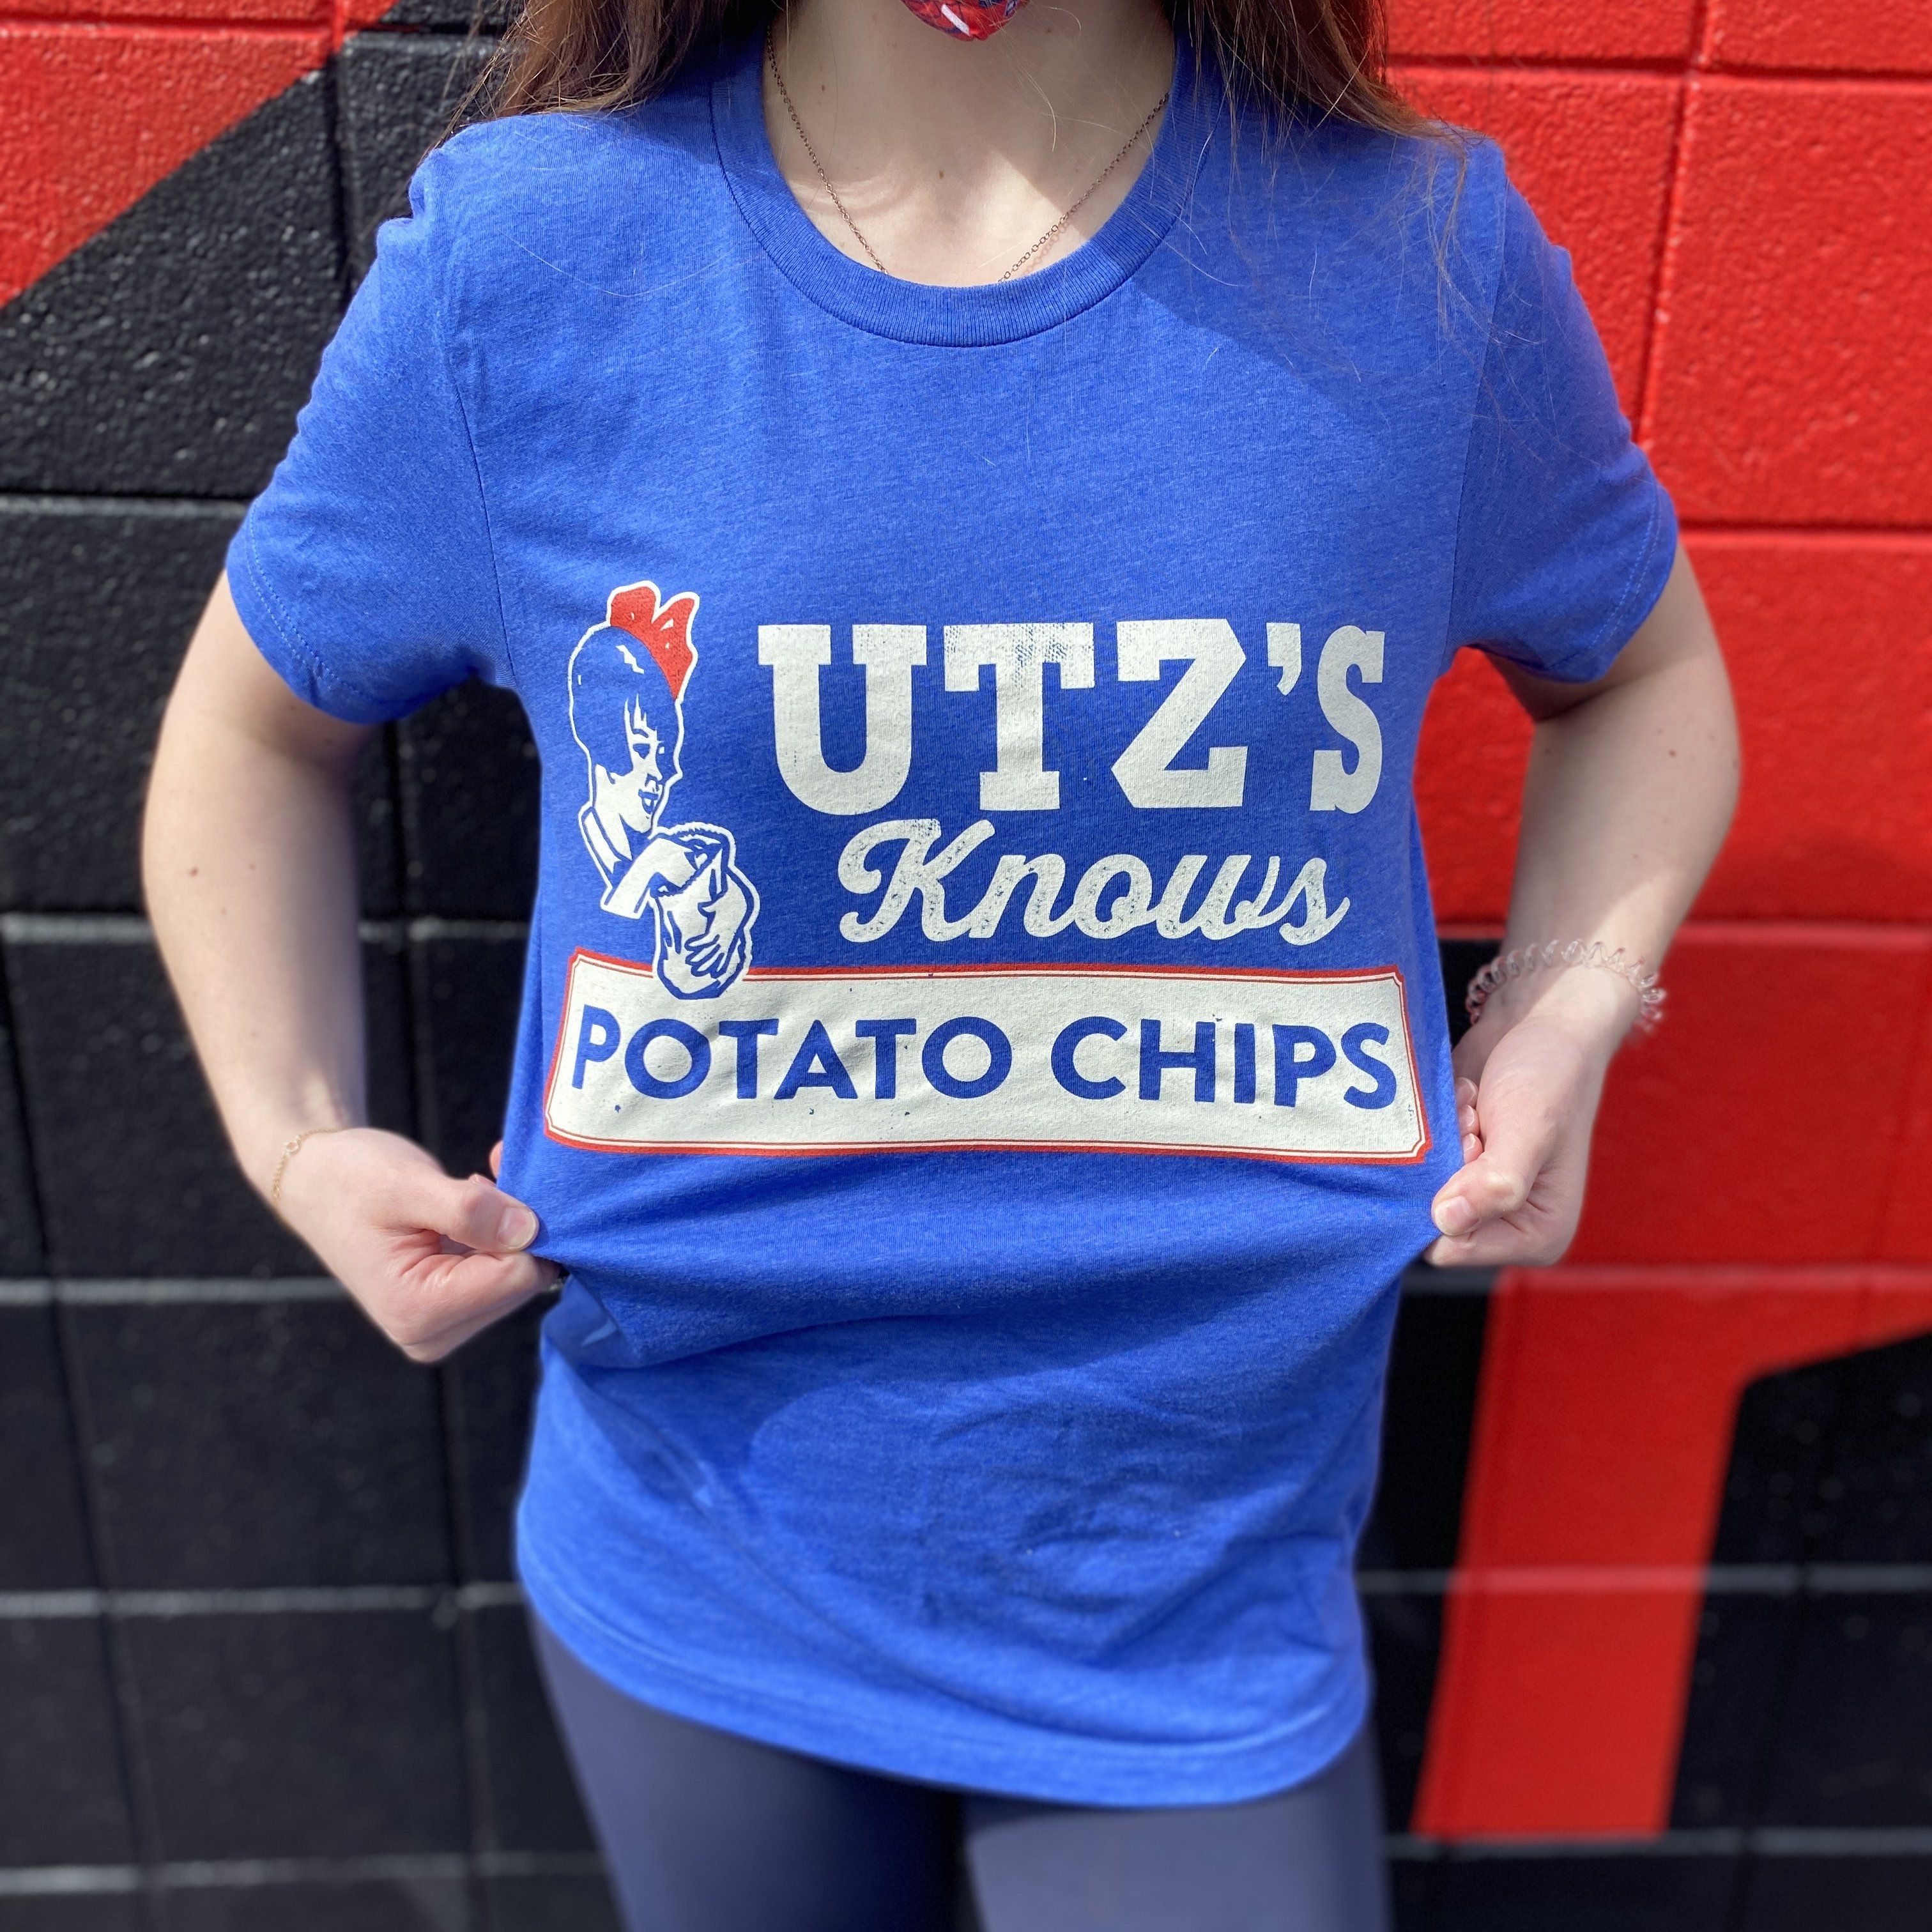 Utz's Knows Potato Chips (Heather Royal) / Shirt - Route One Apparel